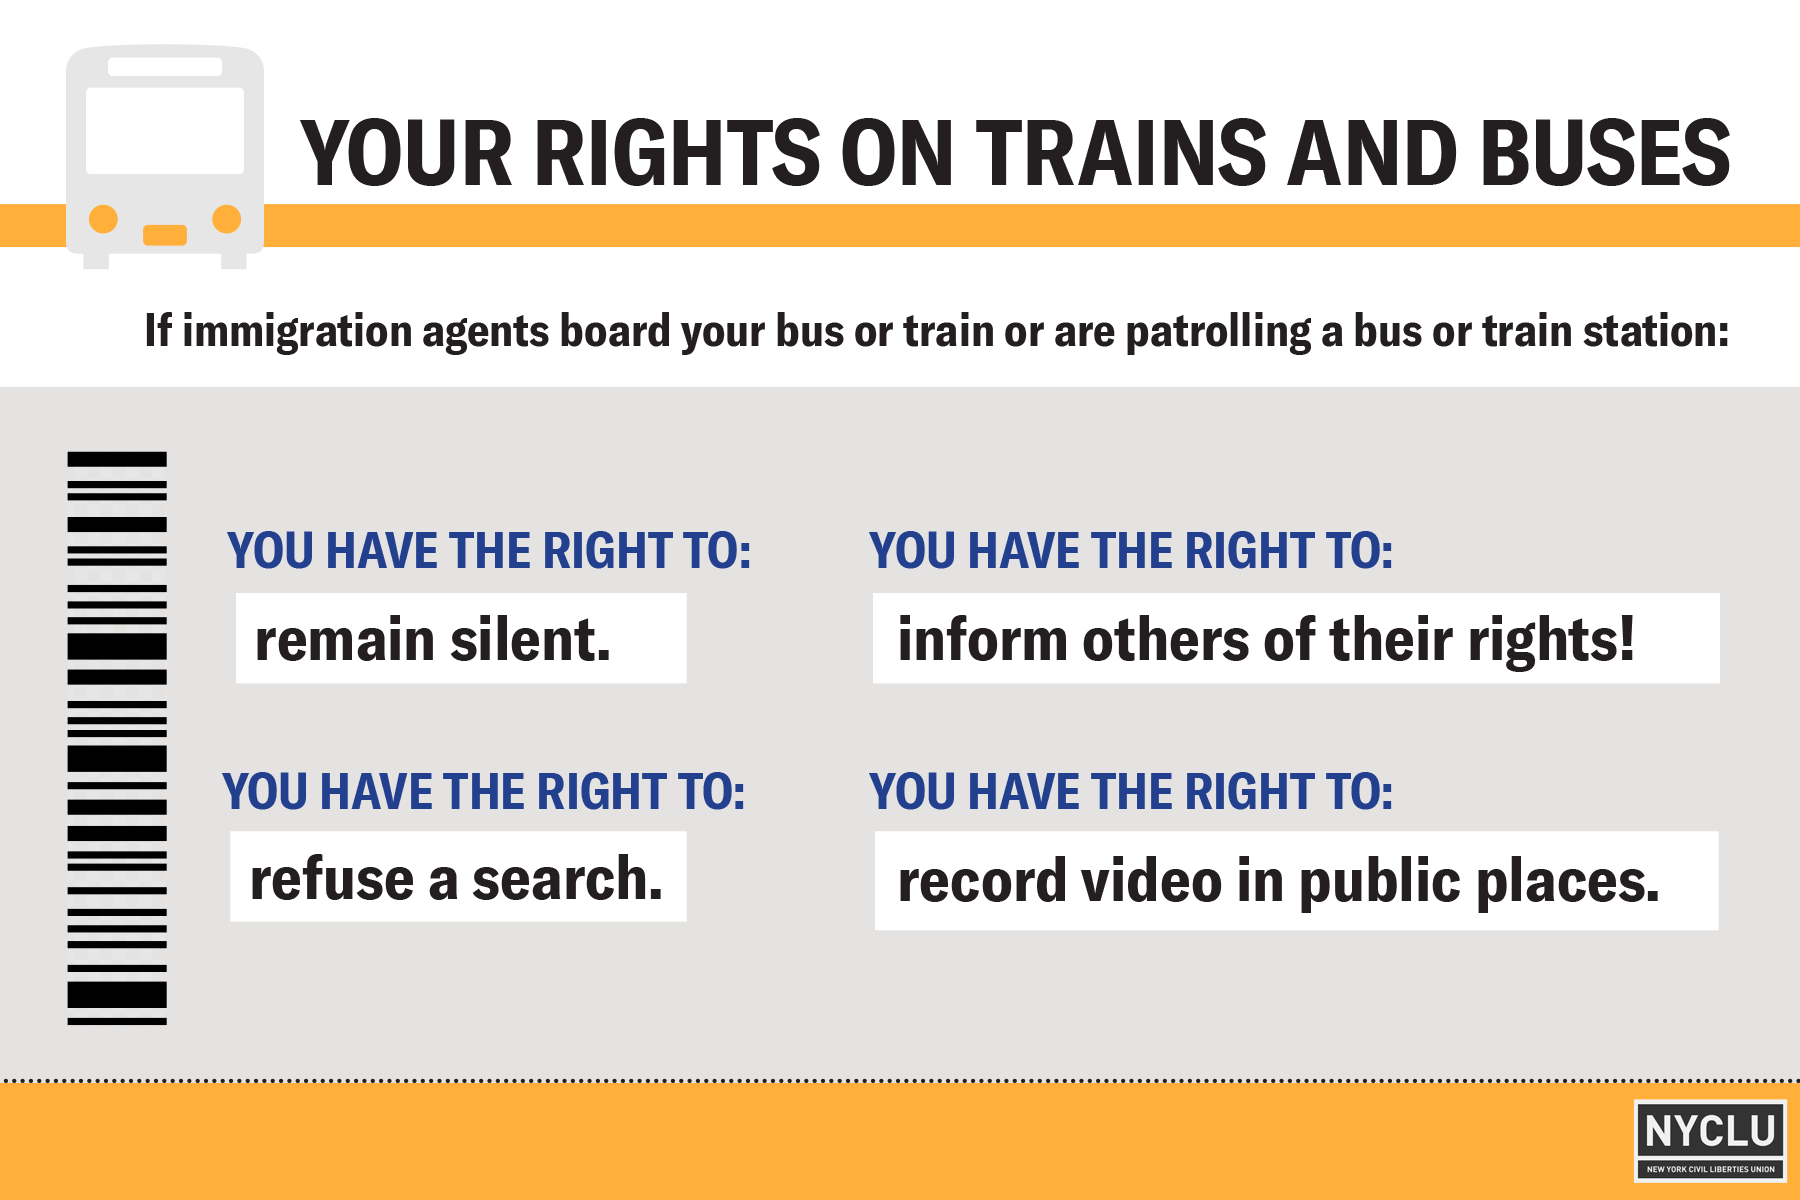 Know Your Rights on Trains and Buses